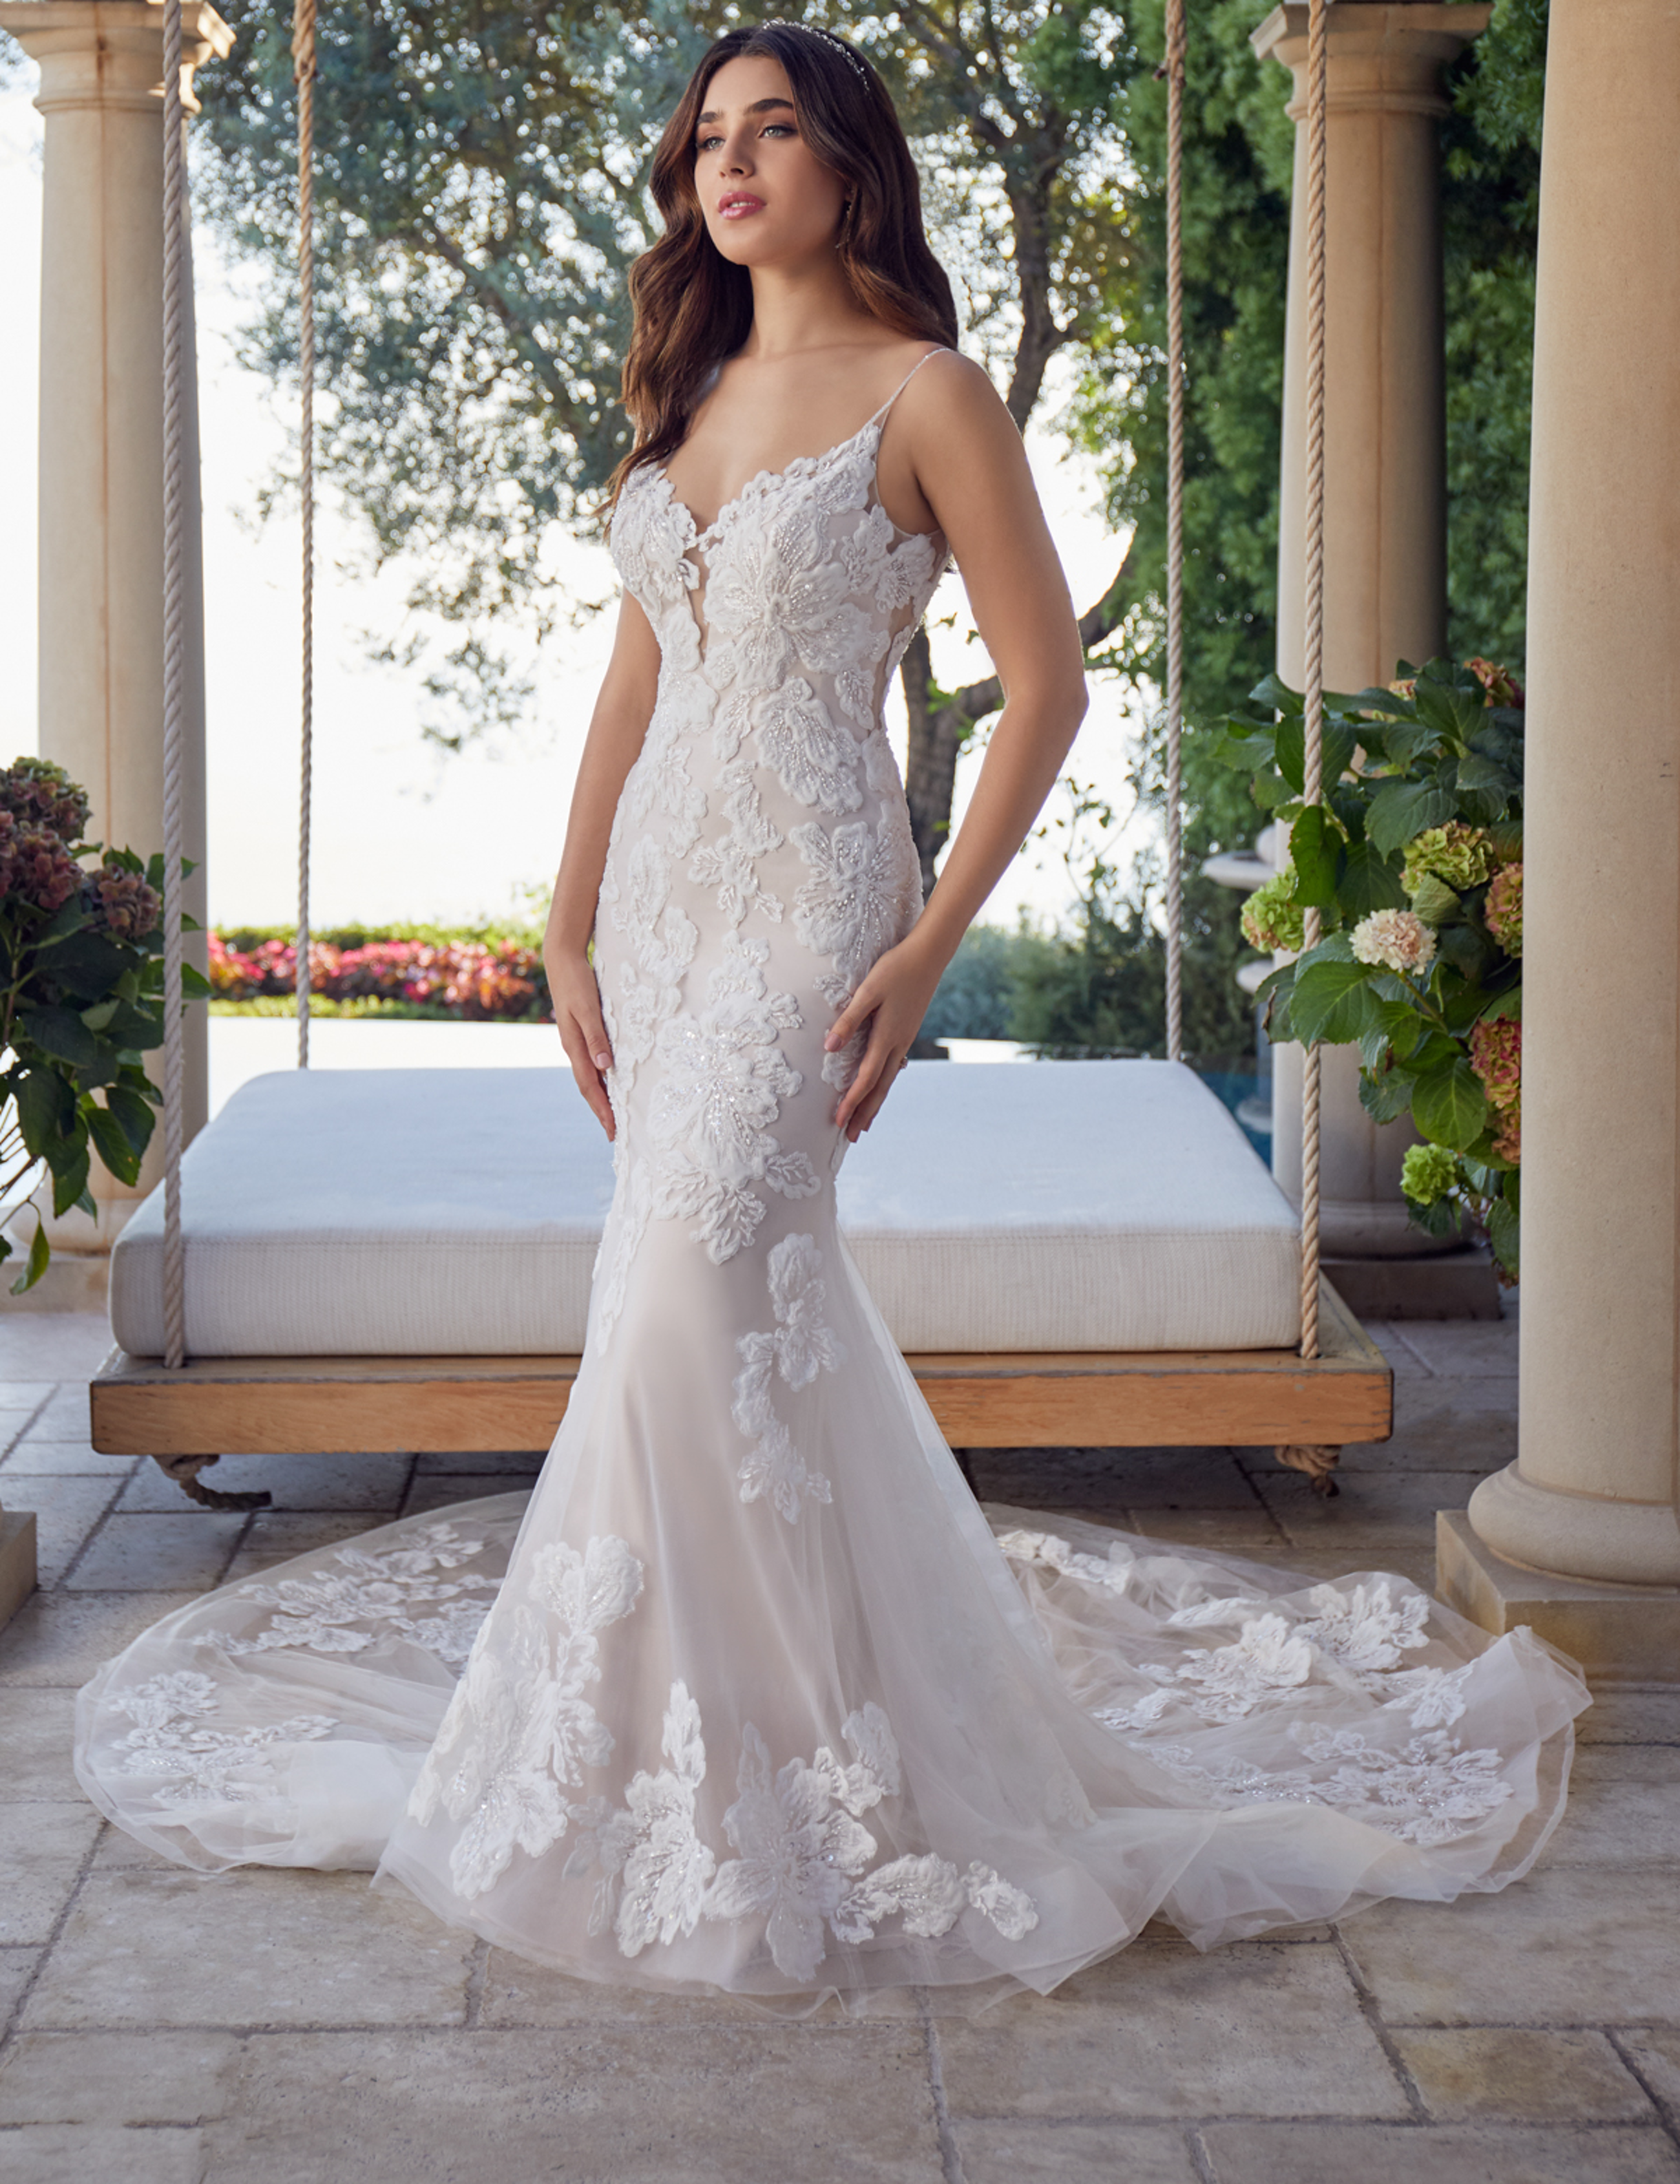 How Do I Begin Looking For My Perfect Wedding Dress? Image